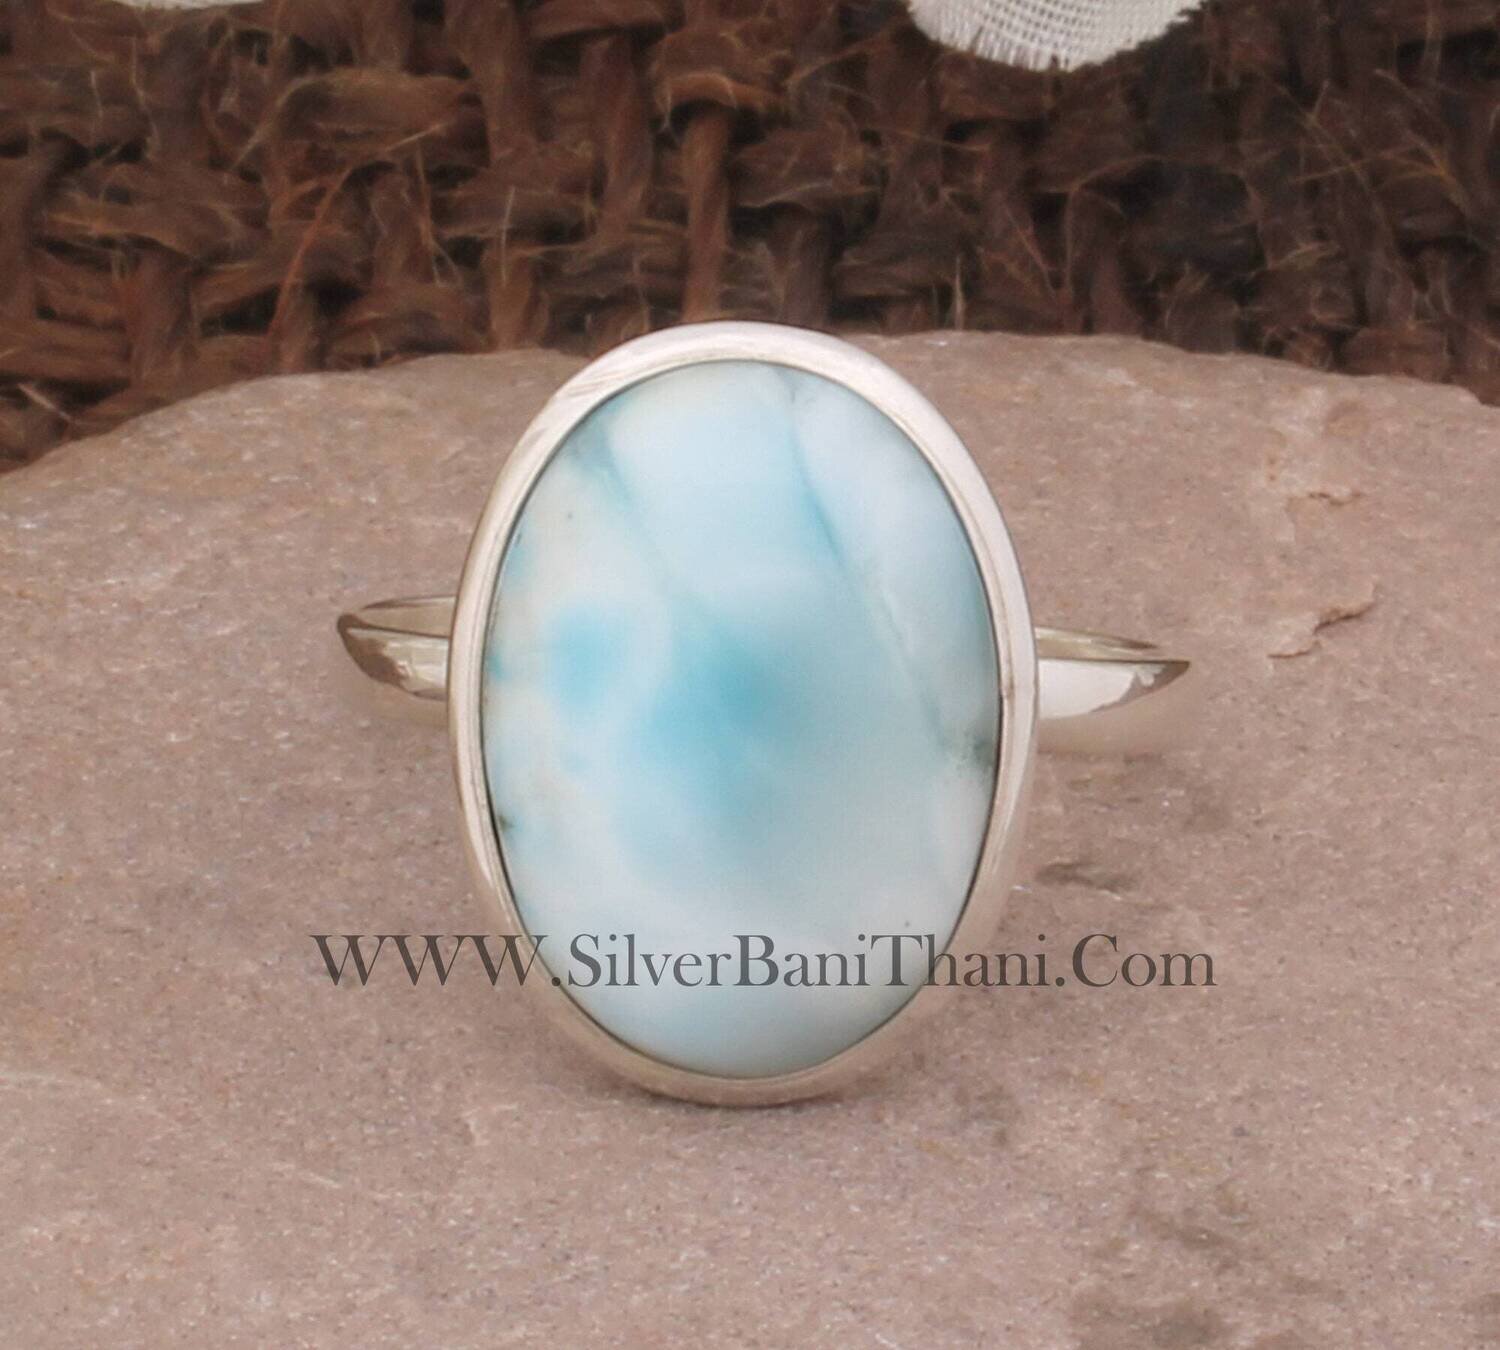 Larimar Ring 925 Sterling Silver Ring For Women Bohemian Jewelry Boho Silver Simple Ring Blue Gemstone Birthday Jewelry For Her Gift Idea